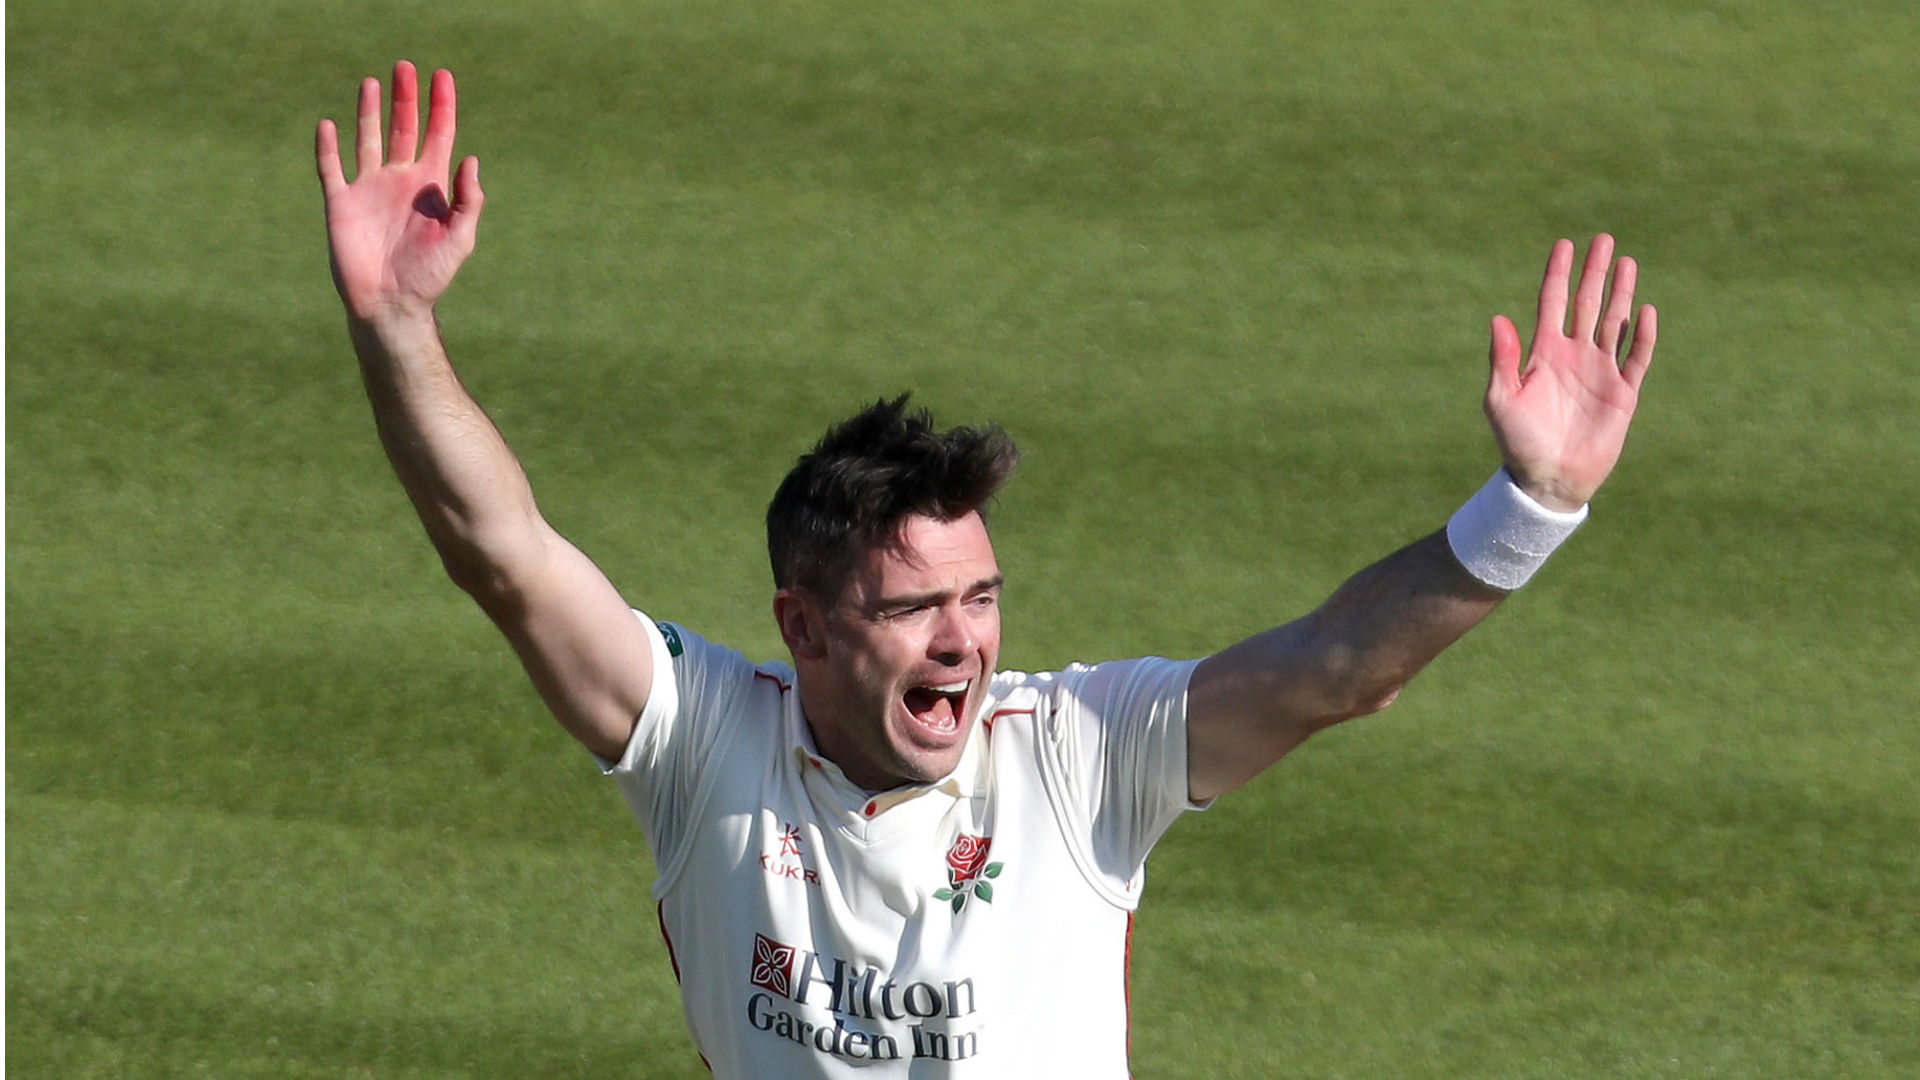 England paceman James Anderson returned to action for Lancashire on Monday, taking five wickets against Worcestershire.